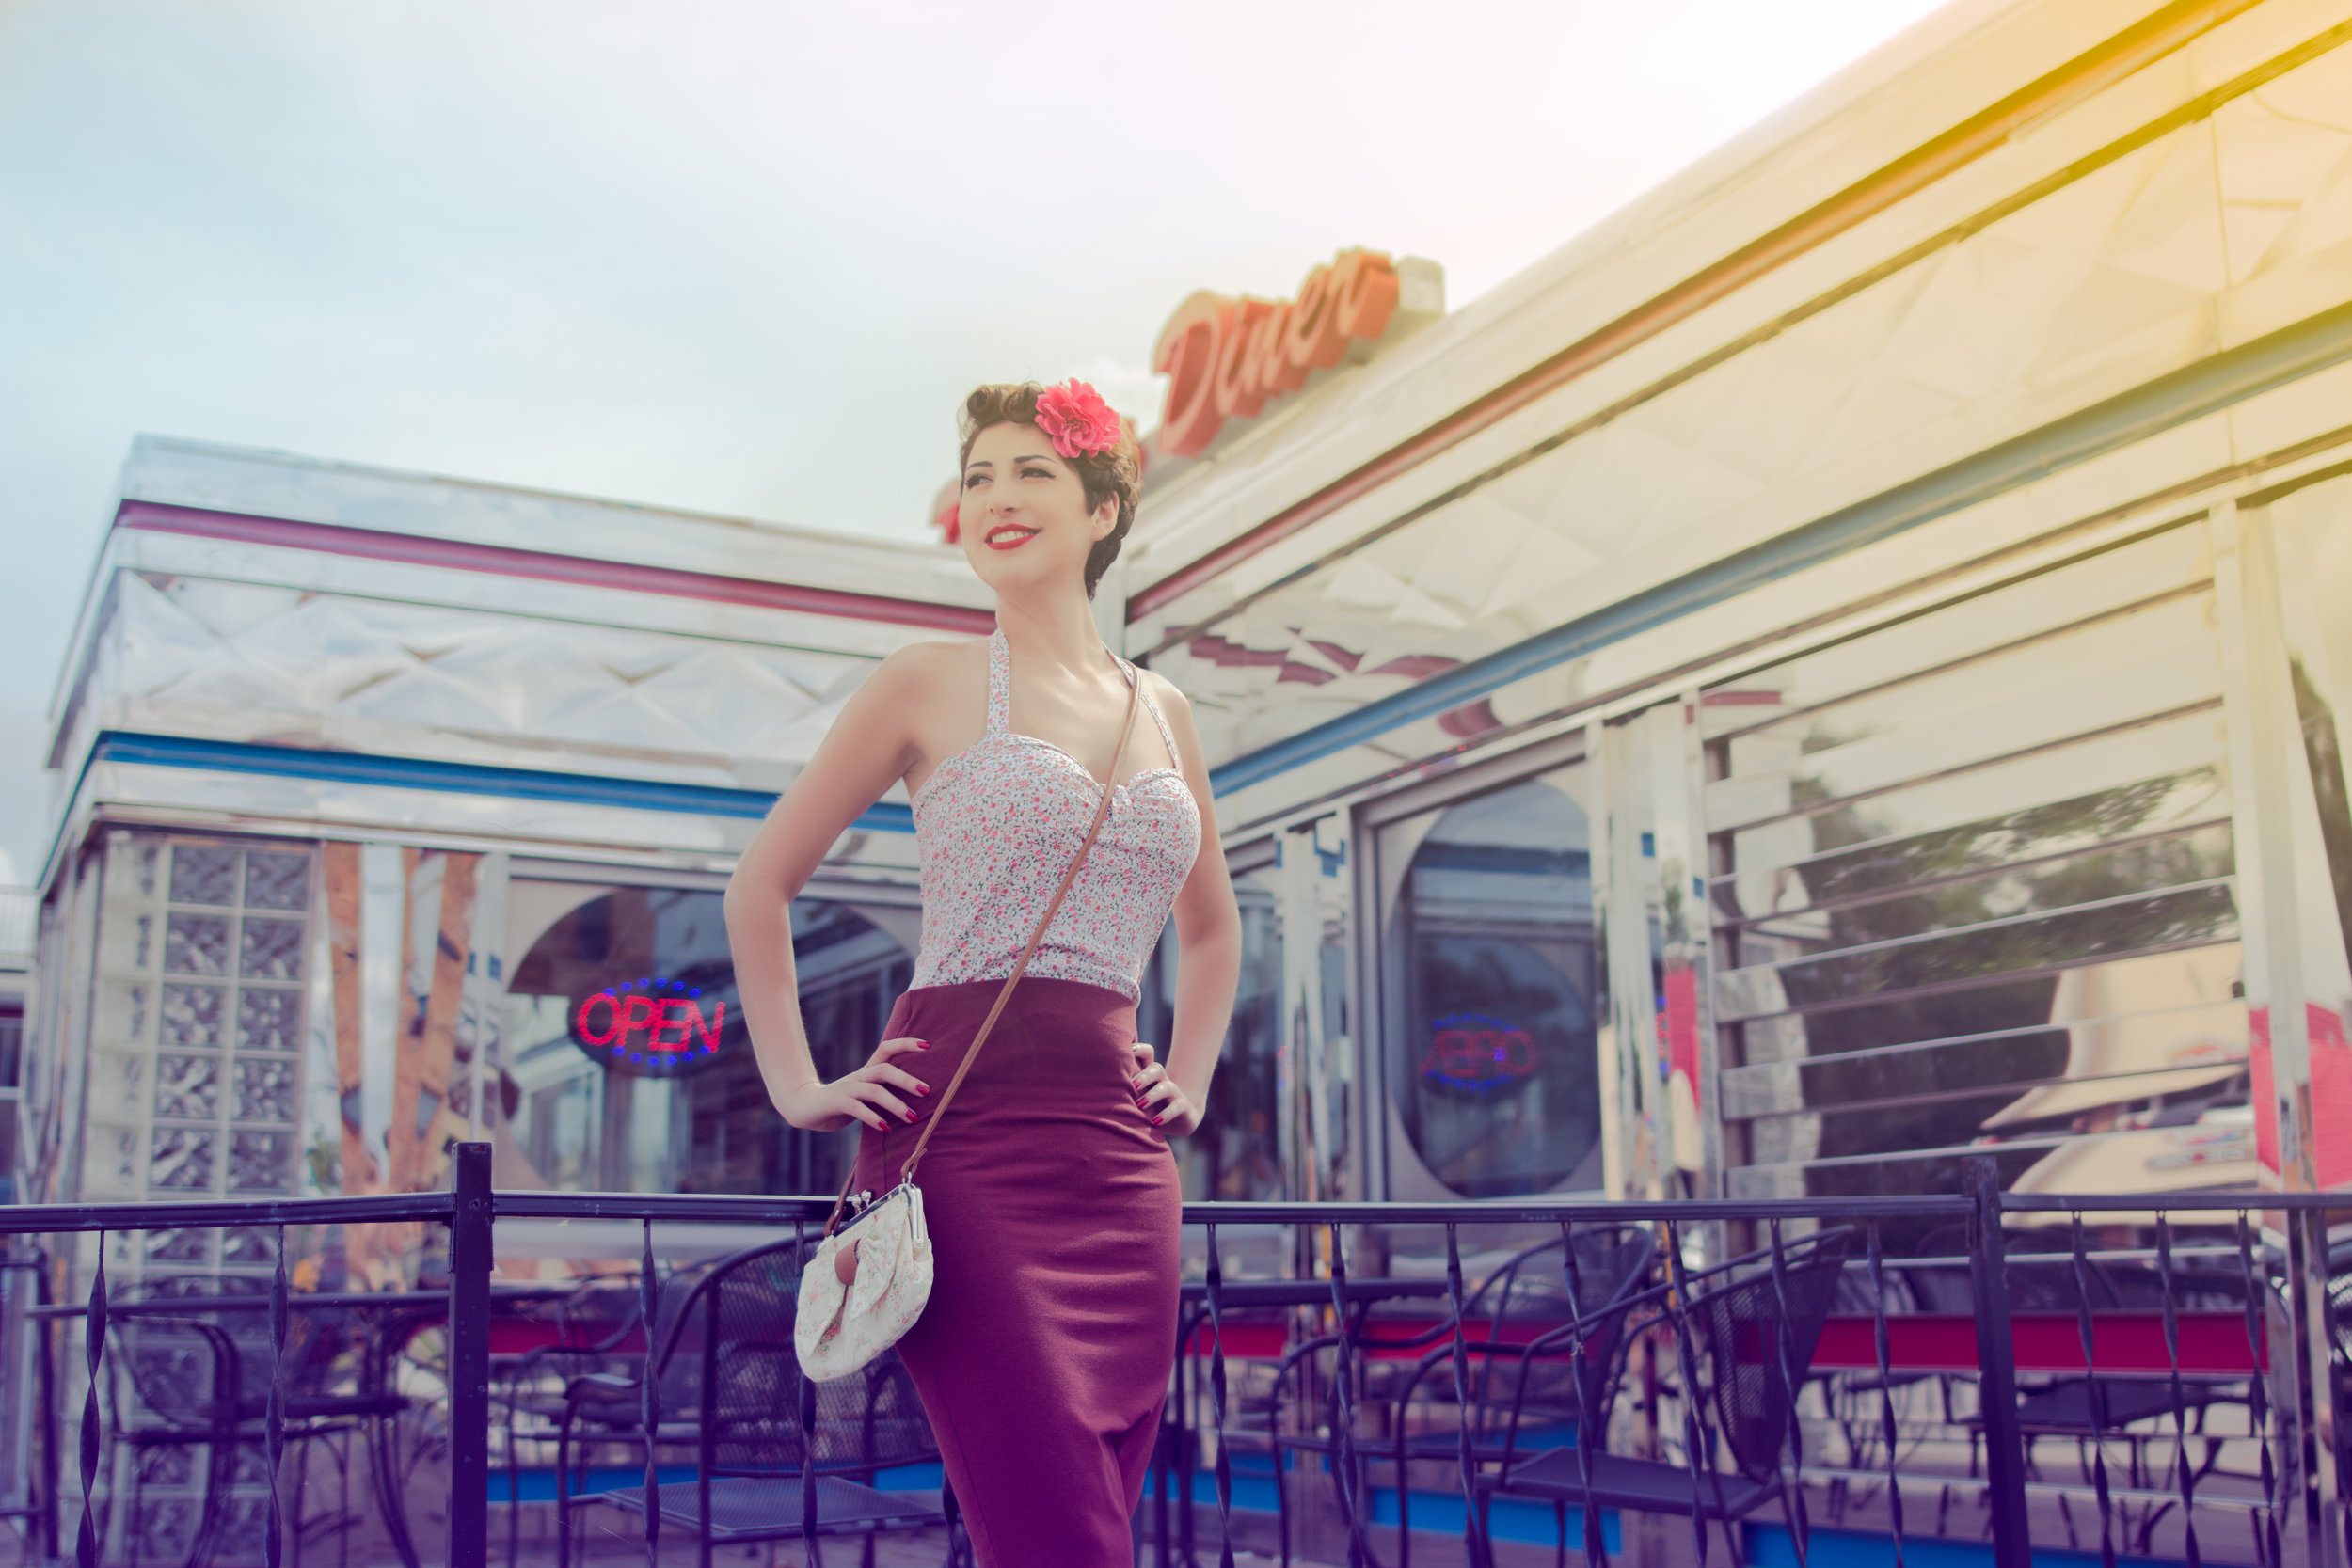  #Retro photoshoot in #porthuron #rockabilly #50s #diner #classic #portrait #photography 